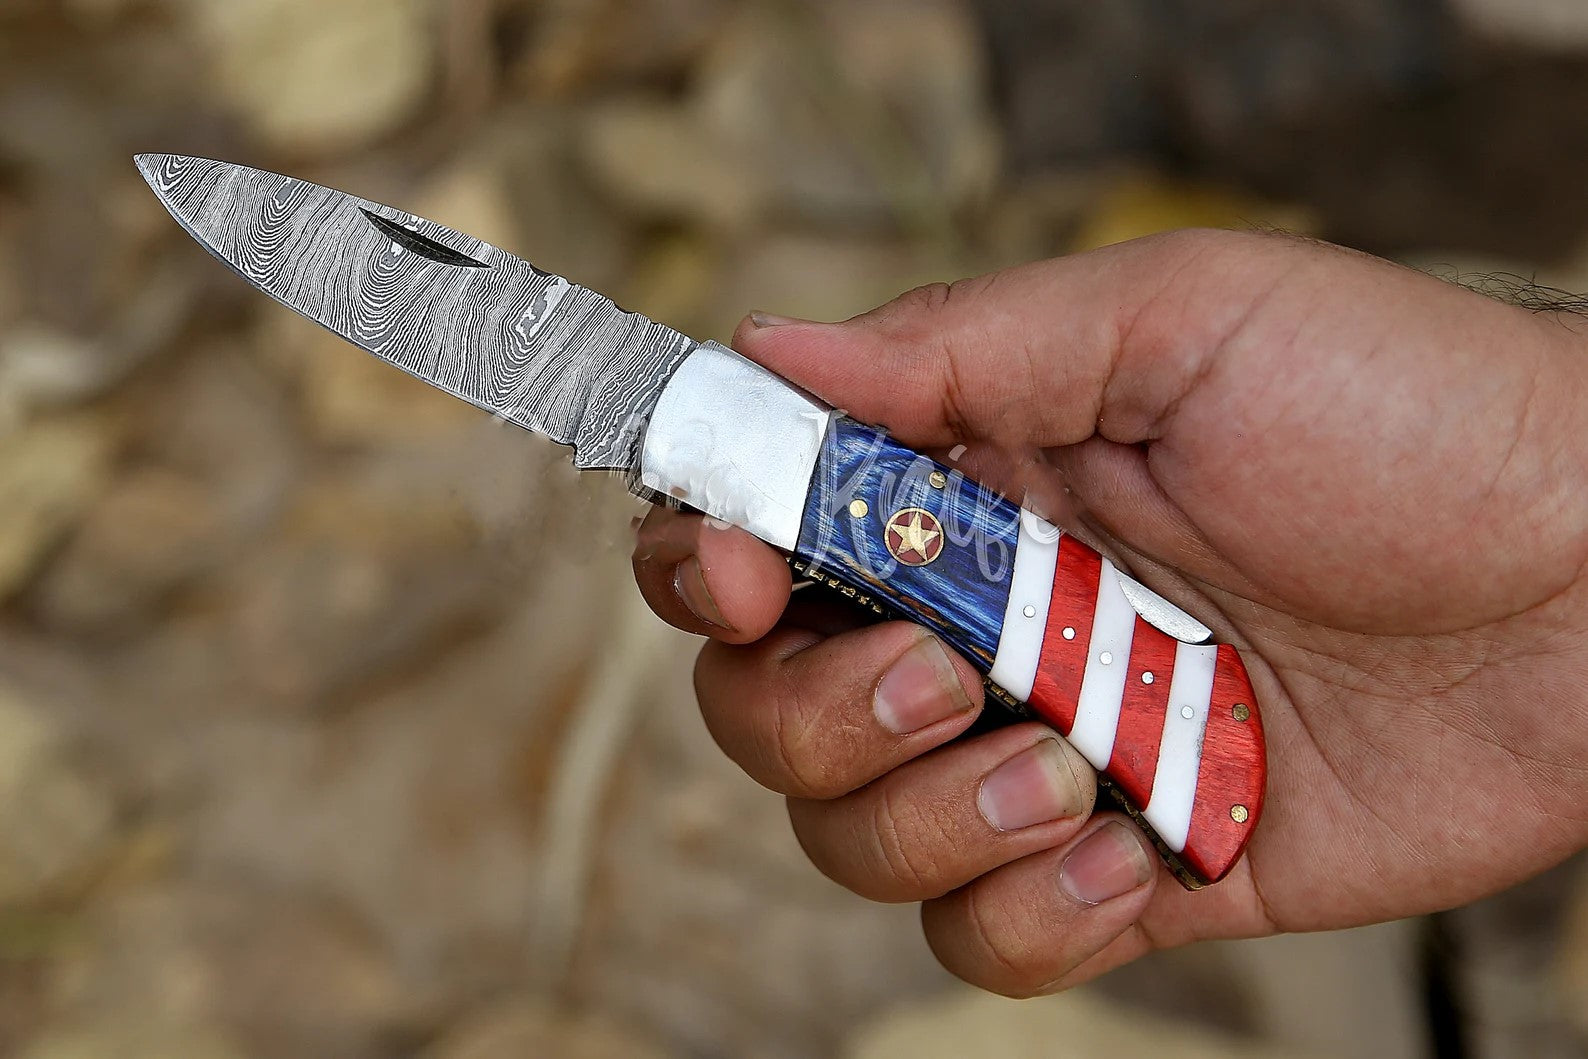 Damascus Steel Folding Pocket Knife – Red, White, and Blue Handle